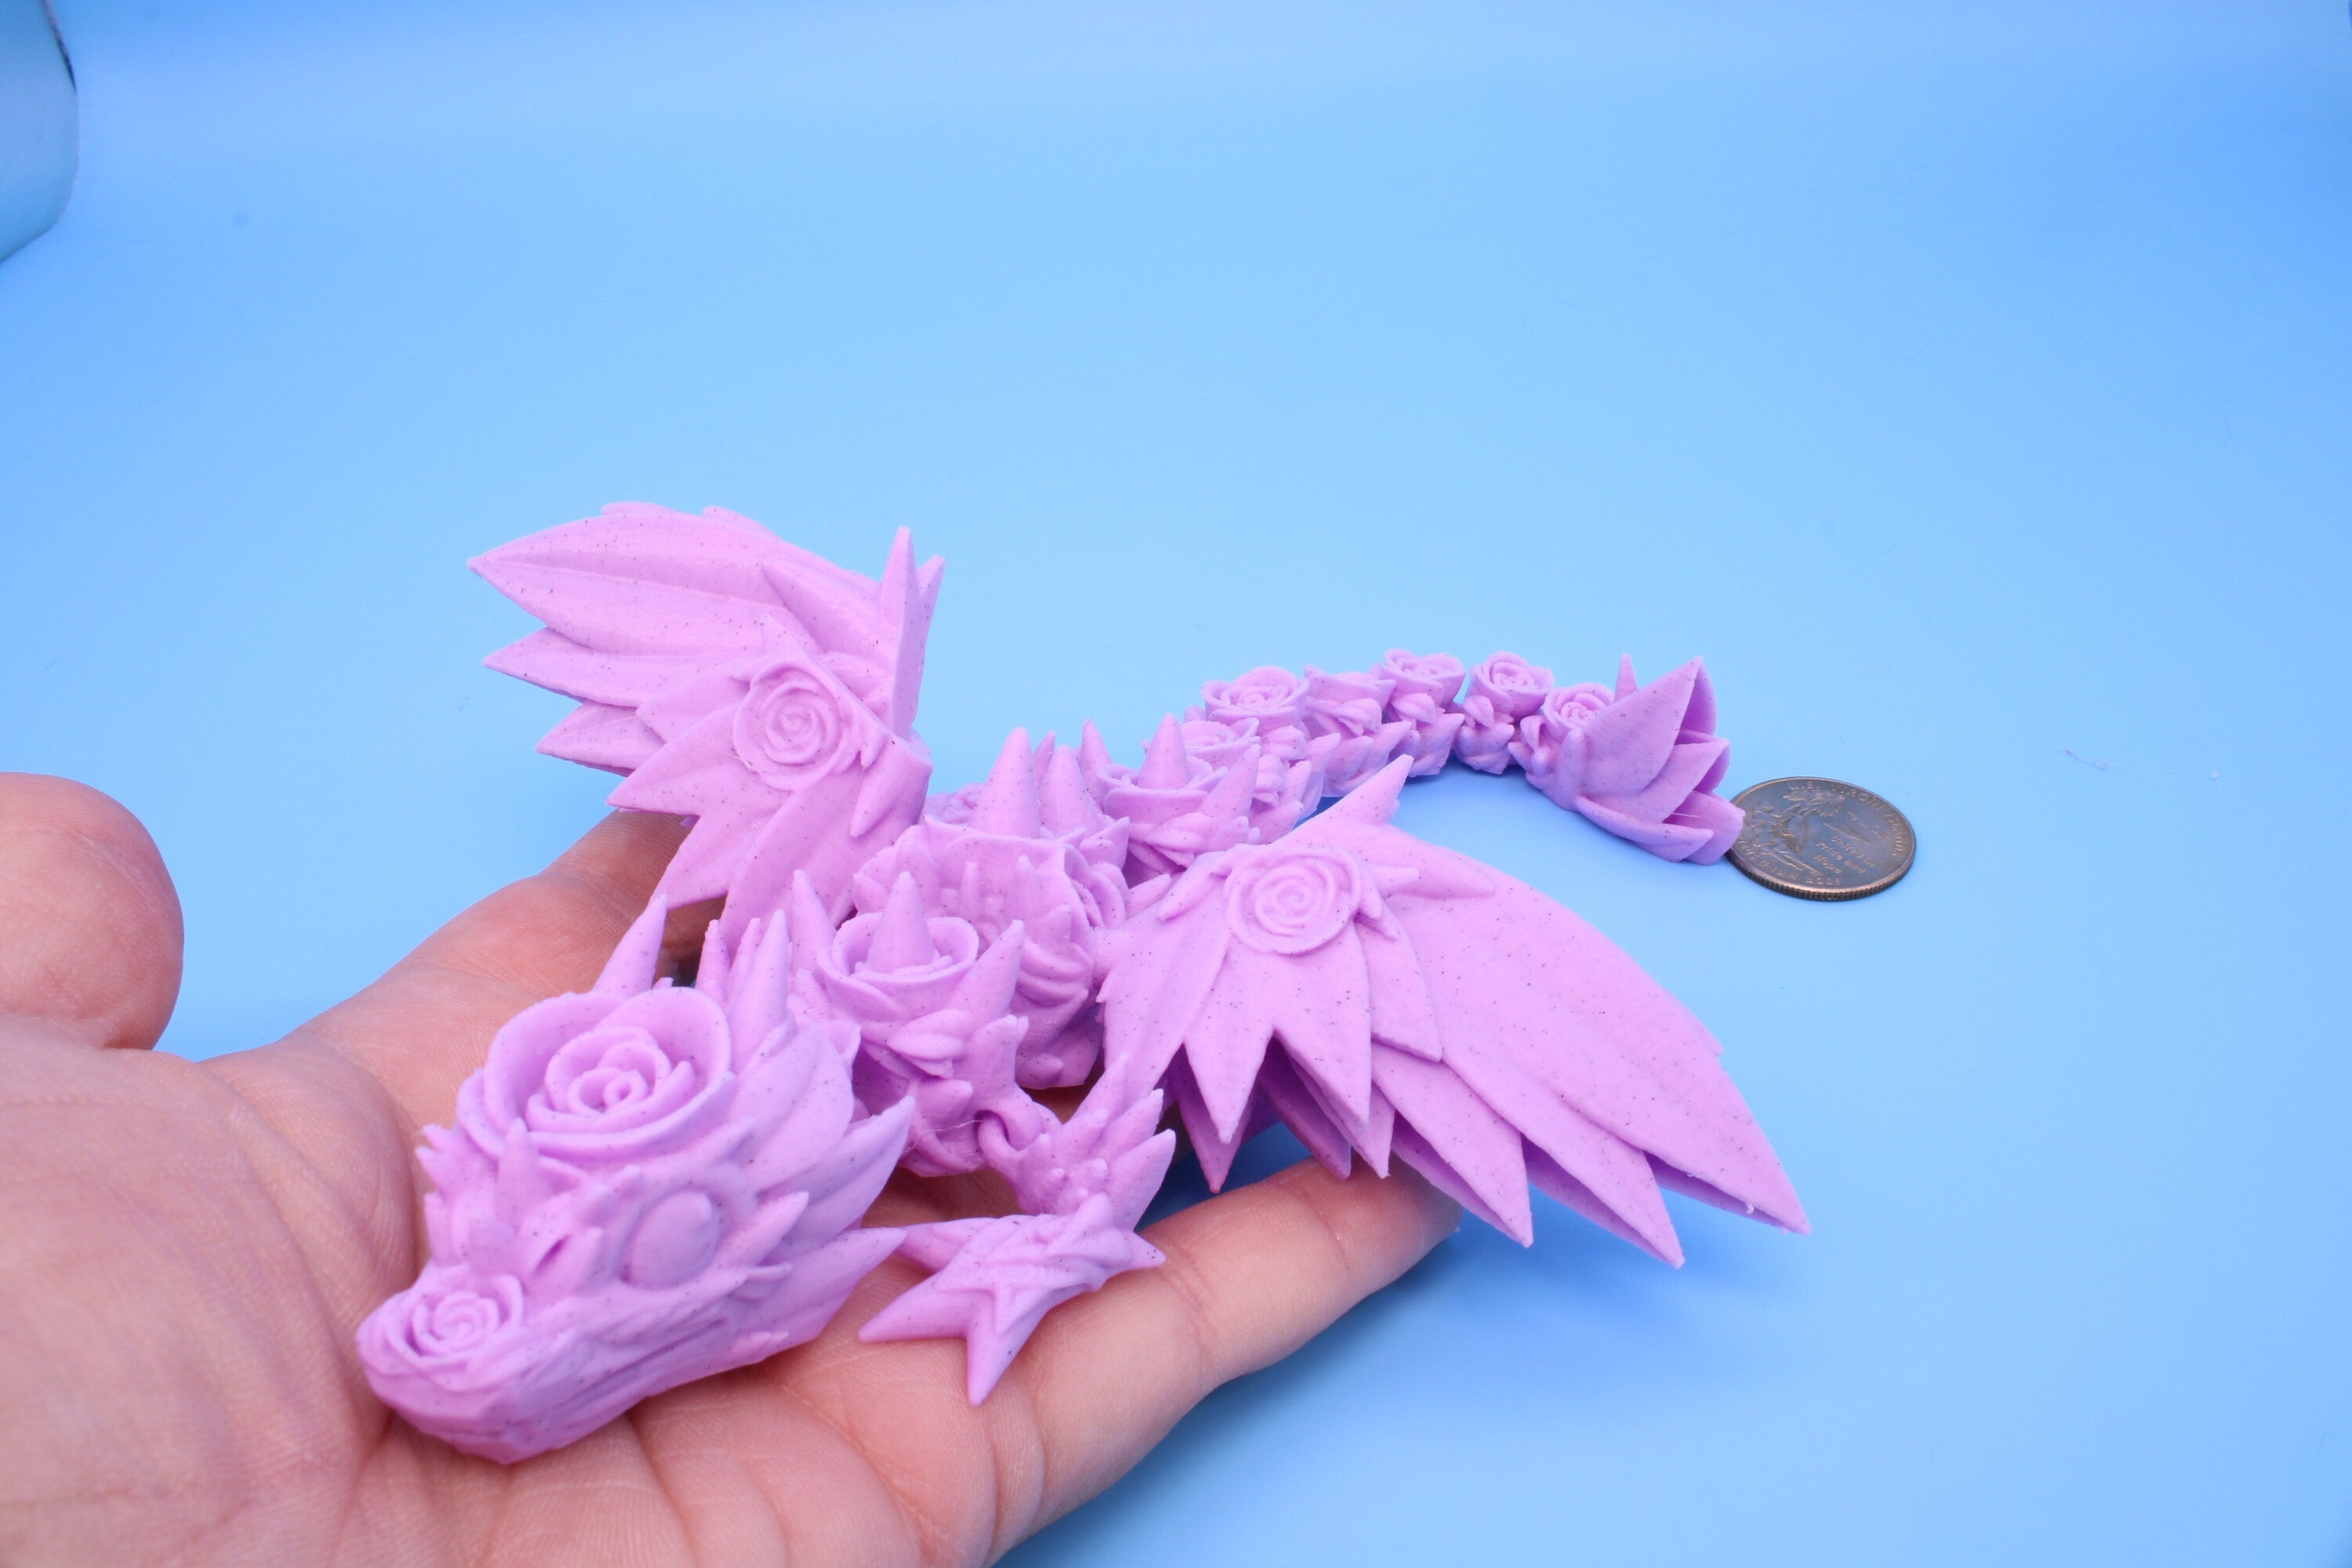 Miniature Baby Rose Wing Dragon, 3D Printed